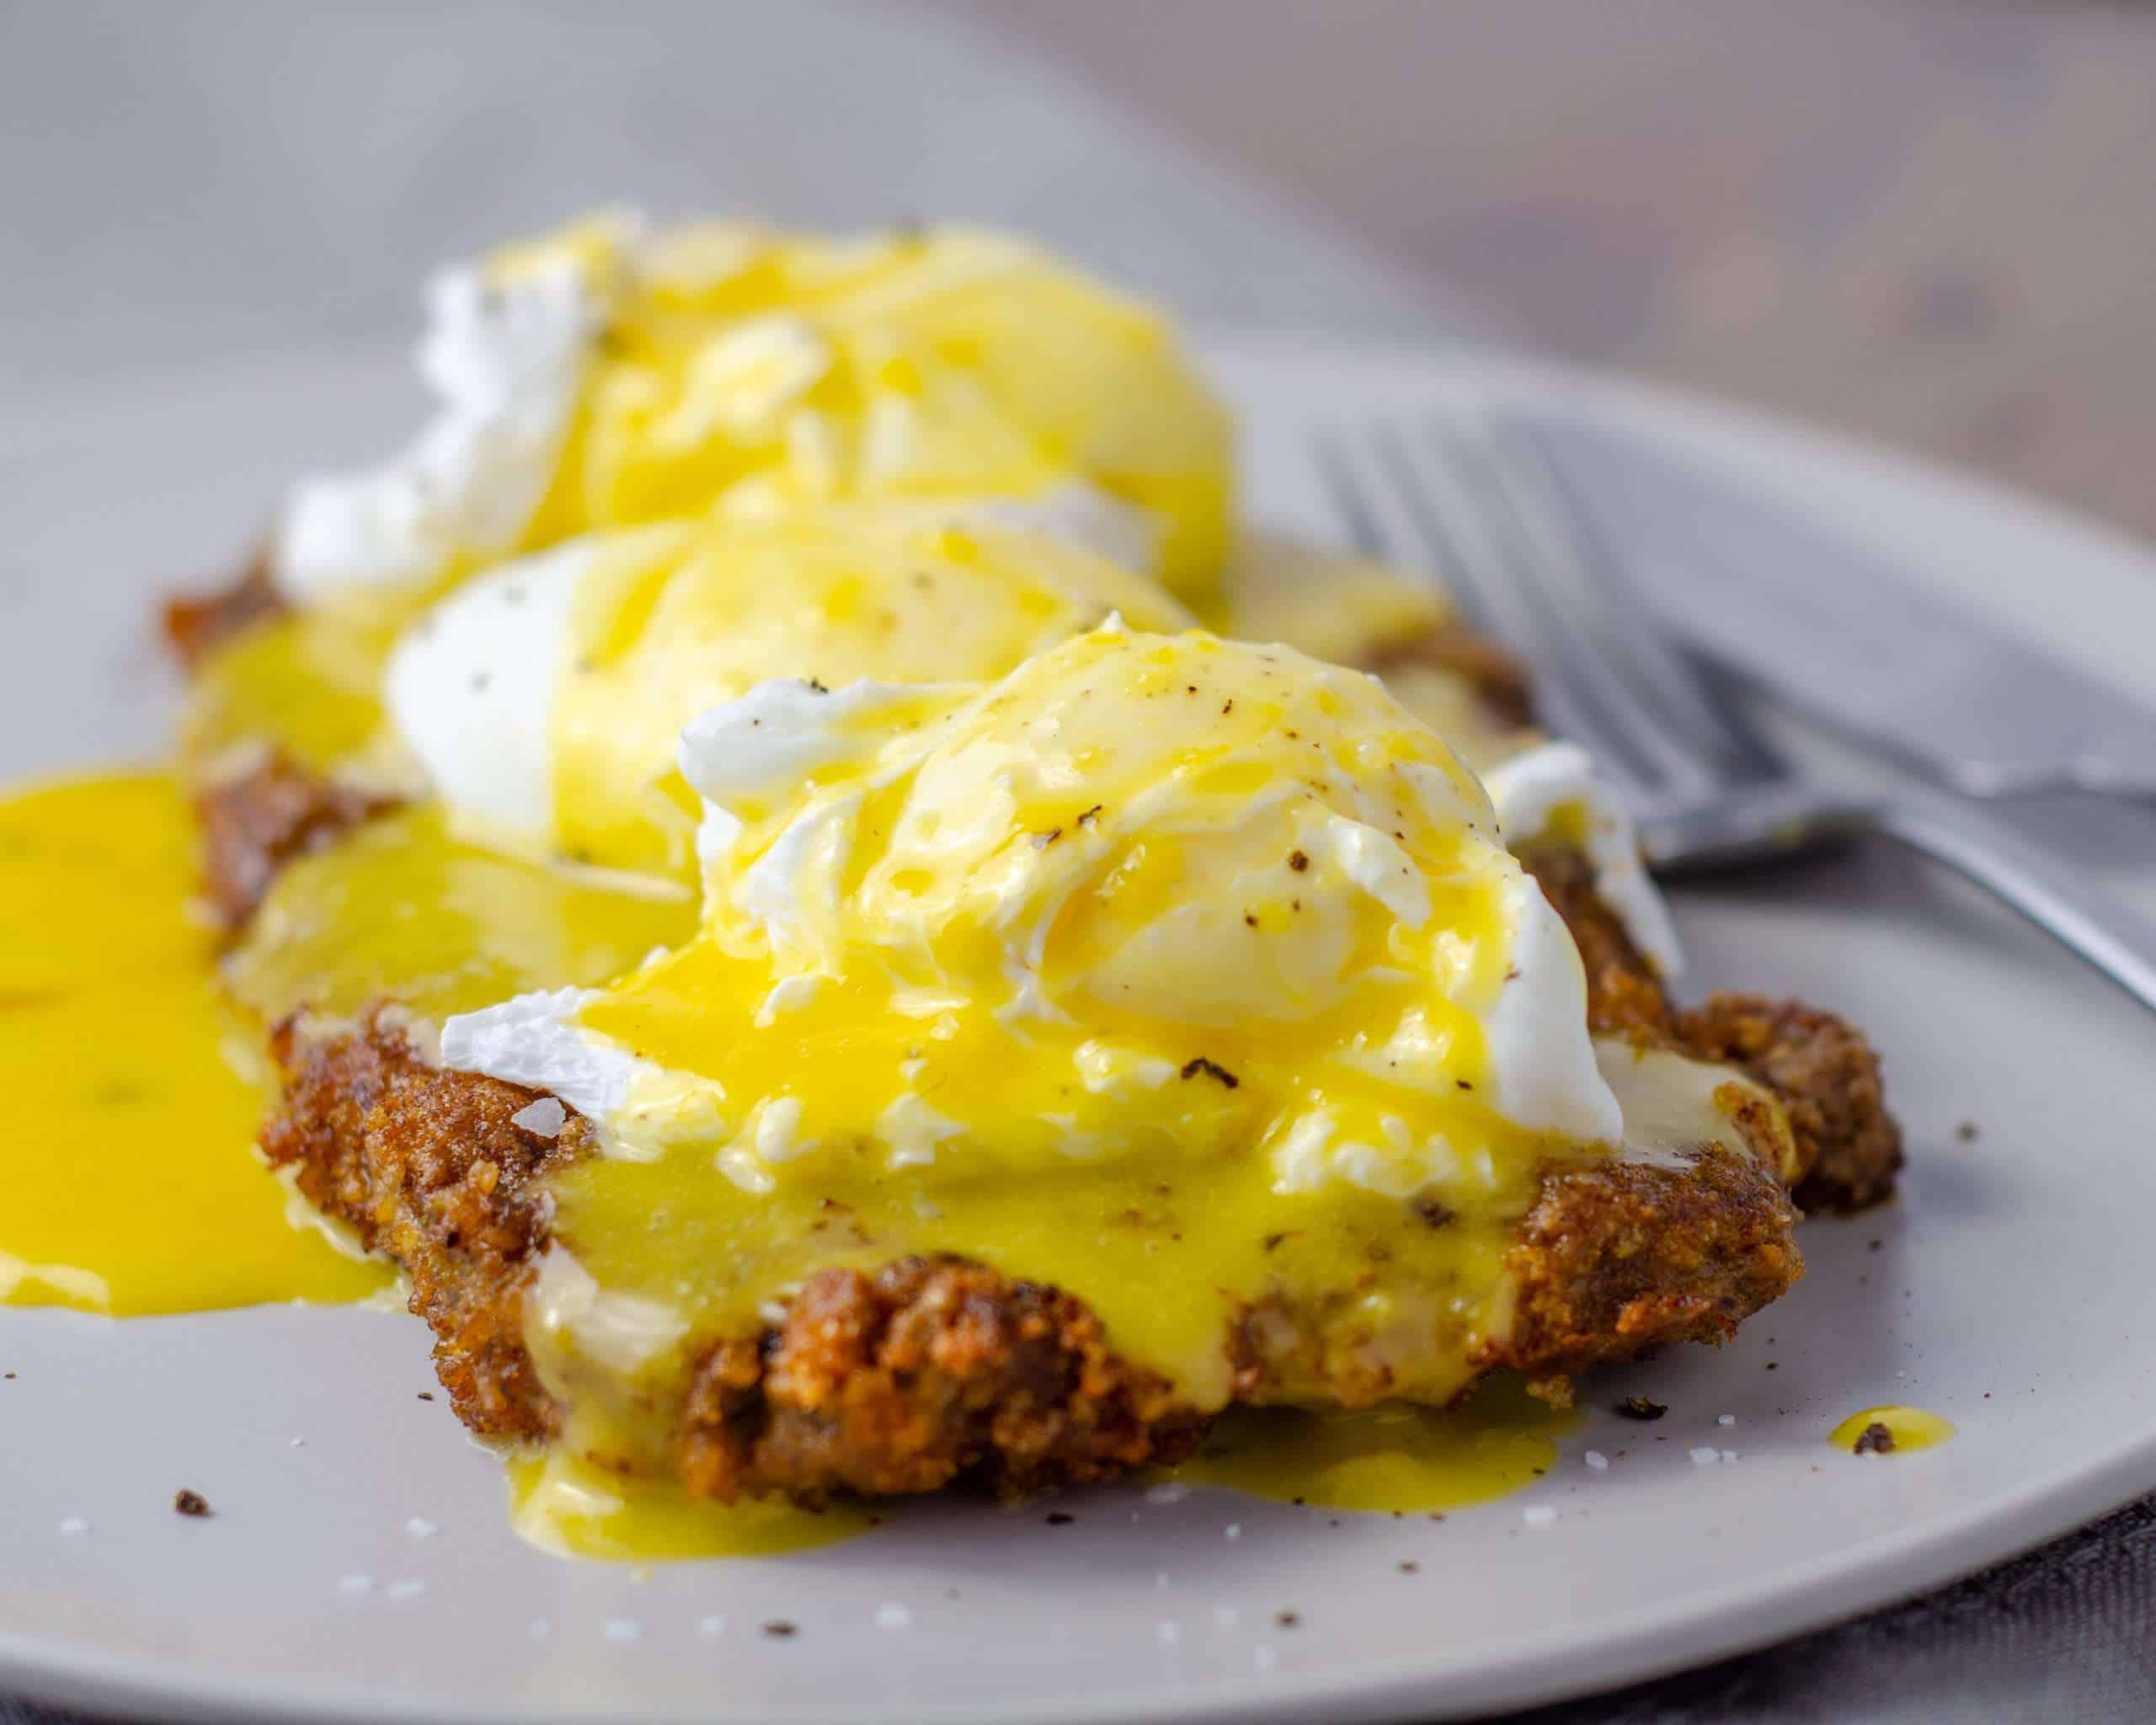 Country Fried Steak with Poached Eggs and Hollandaise